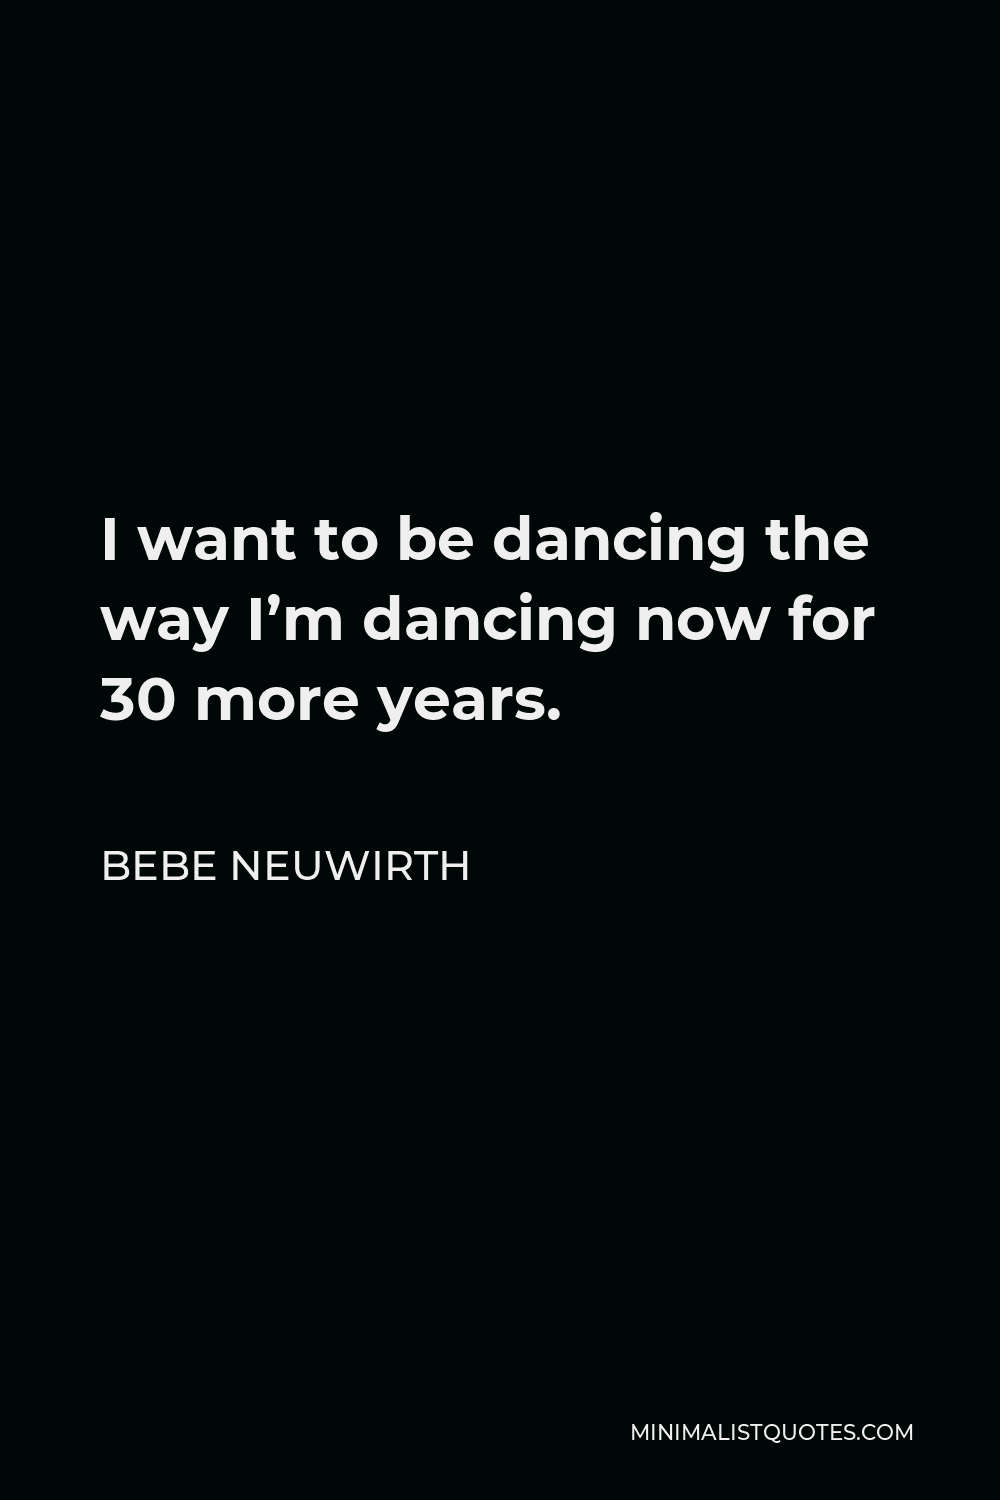 Bebe Neuwirth Quote - I want to be dancing the way I’m dancing now for 30 more years.